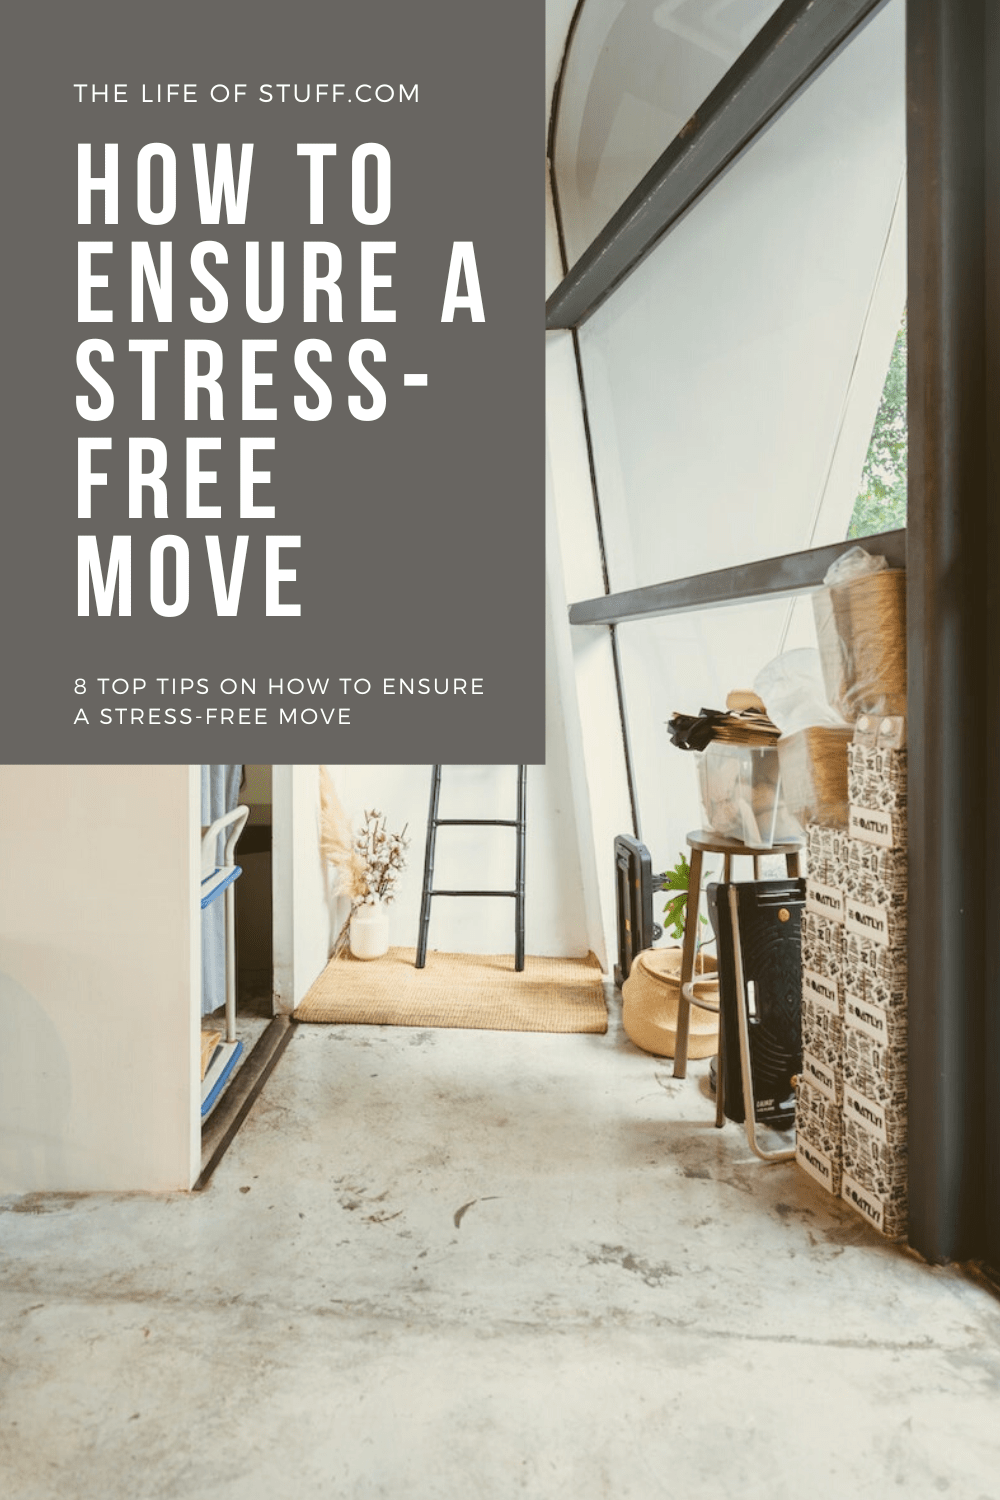 8 Top Tips on How to Ensure a Stress-Free Move - The Life of Stuff